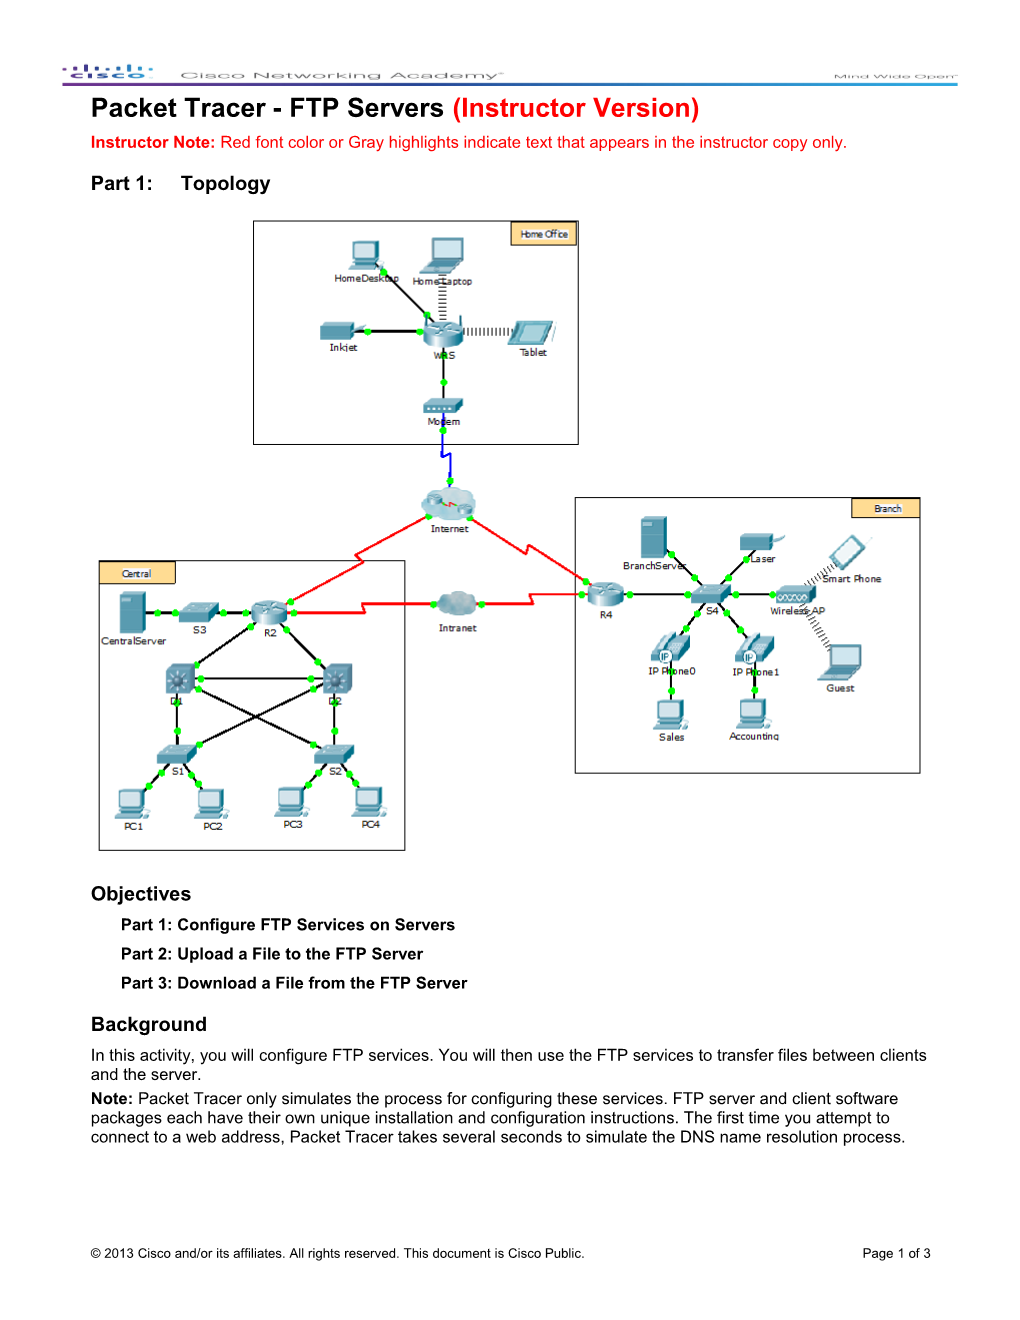 Packet Tracer -FTP Servers